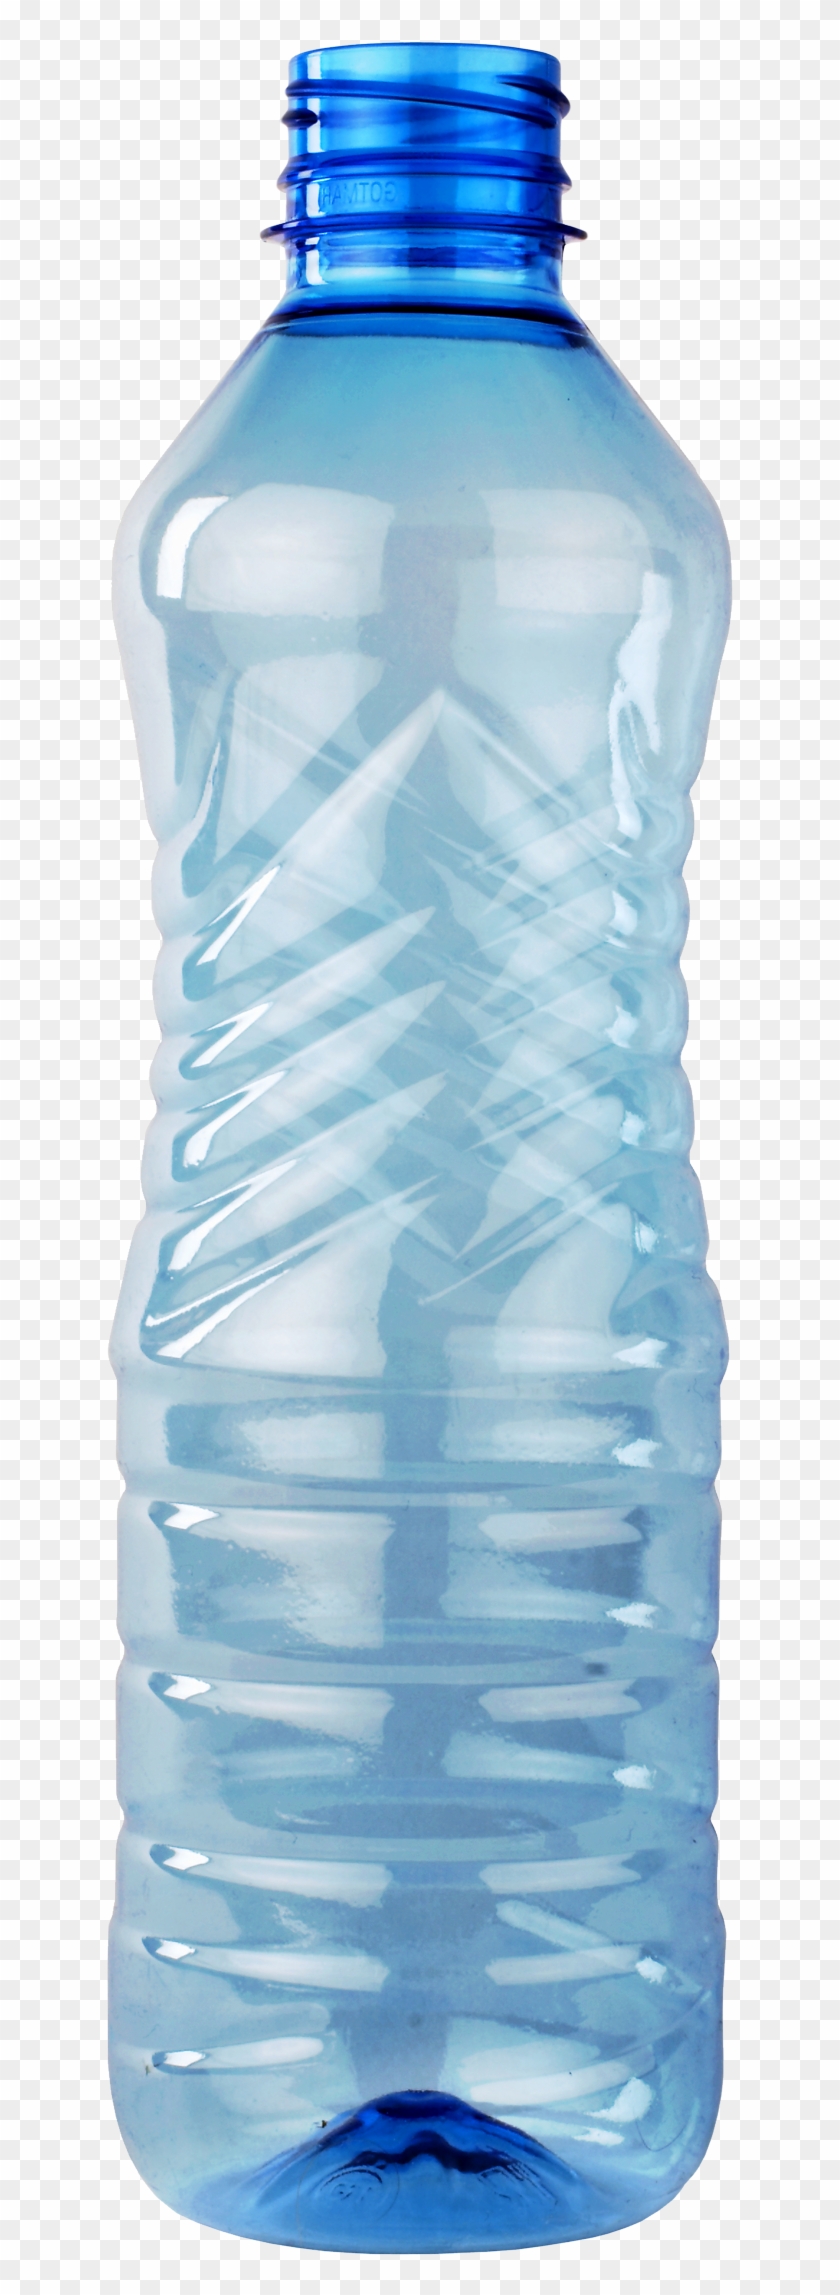 Free Icons Png - Plastic Bottle Trash Png #849055